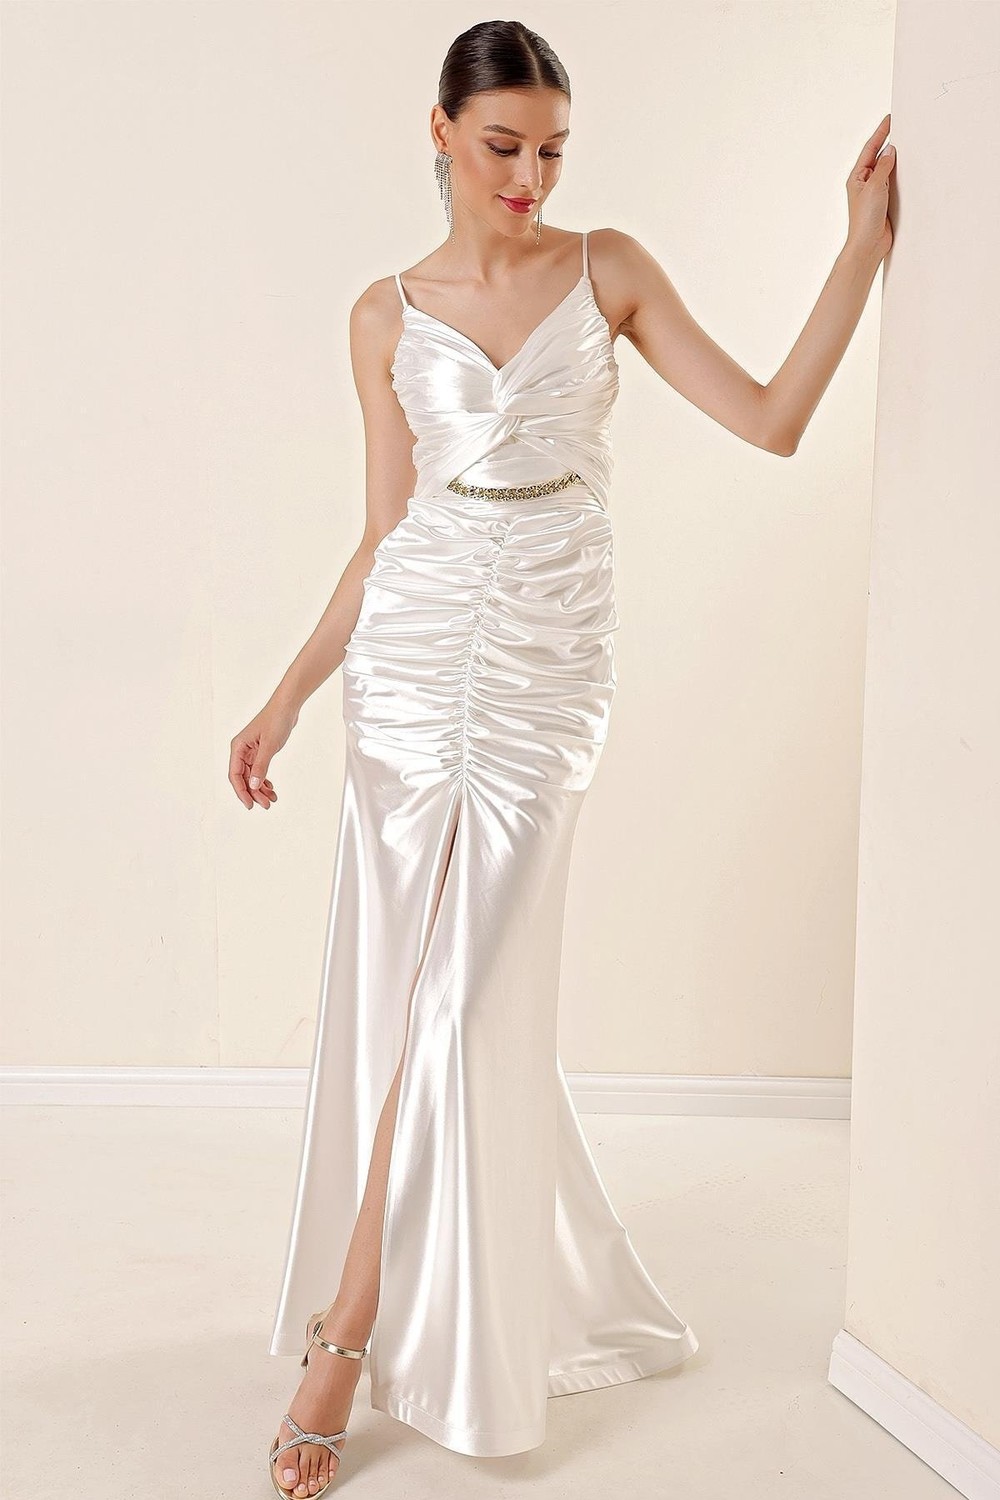 By Saygı Rope Hangings Draped Front with Chain Accessories and a Slit in the Front Lined Satin Long Dress White